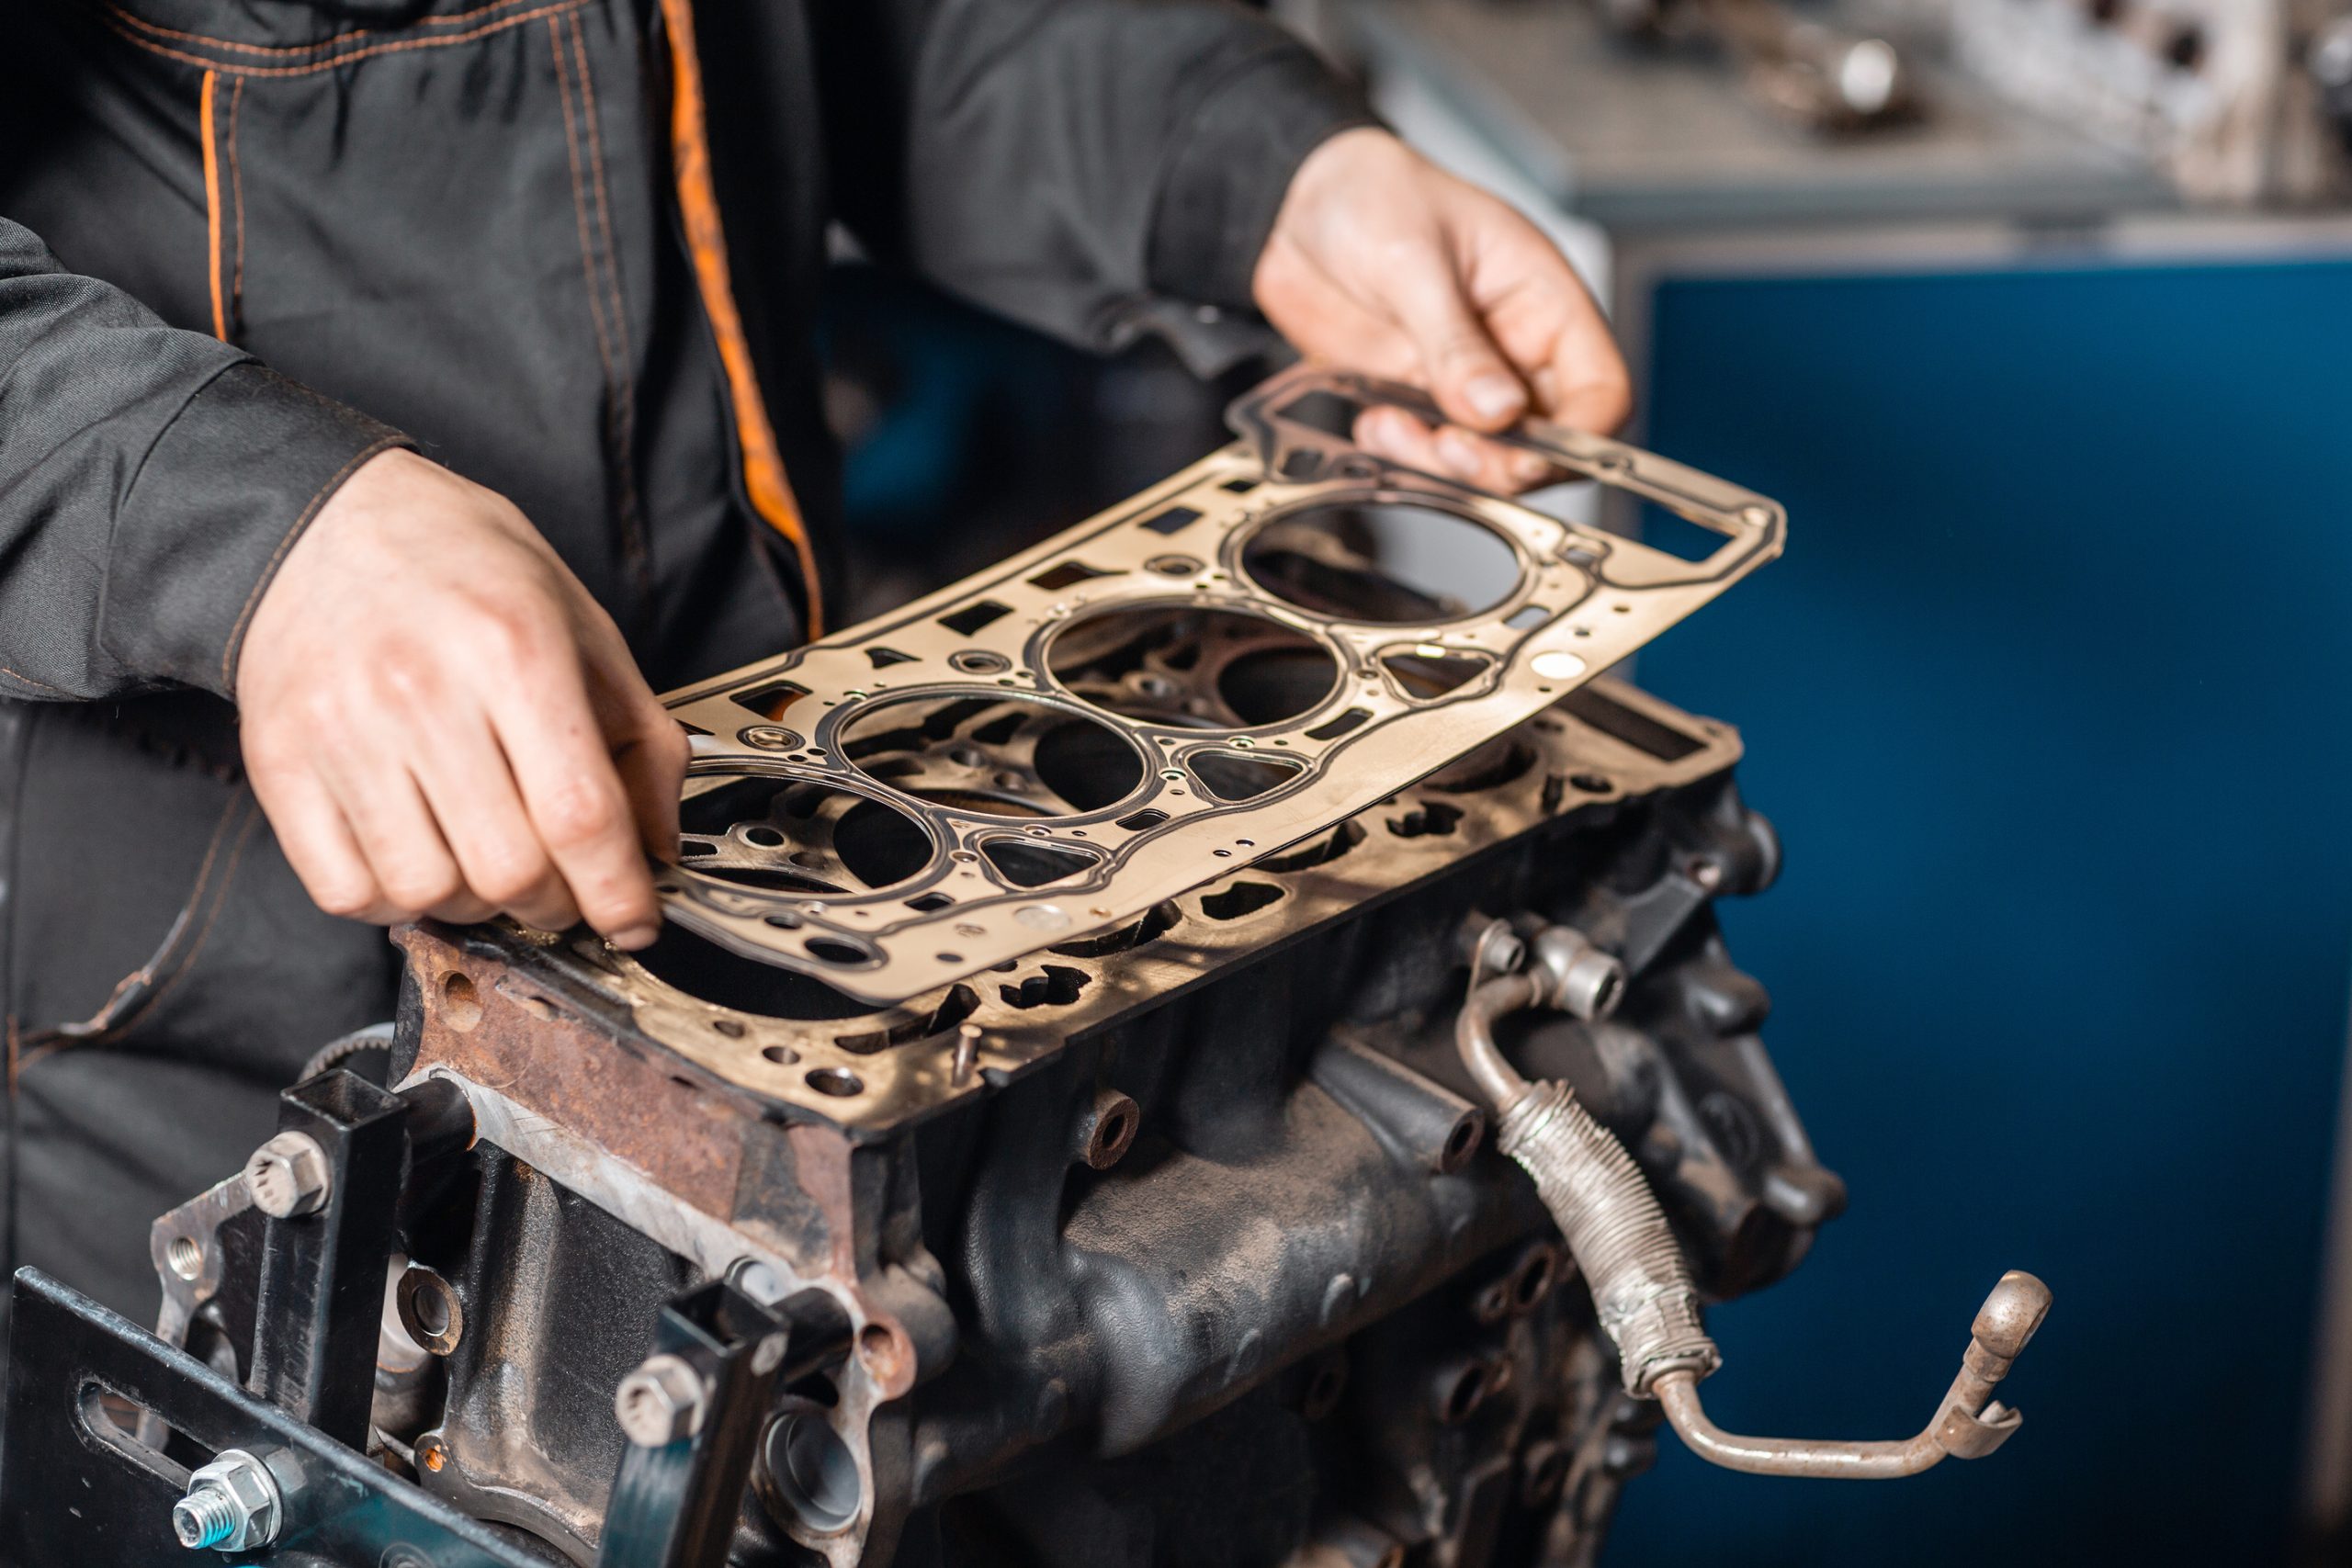 Head Gasket Repair Cost – How Much Does It Cost to Replace a Headgasket?